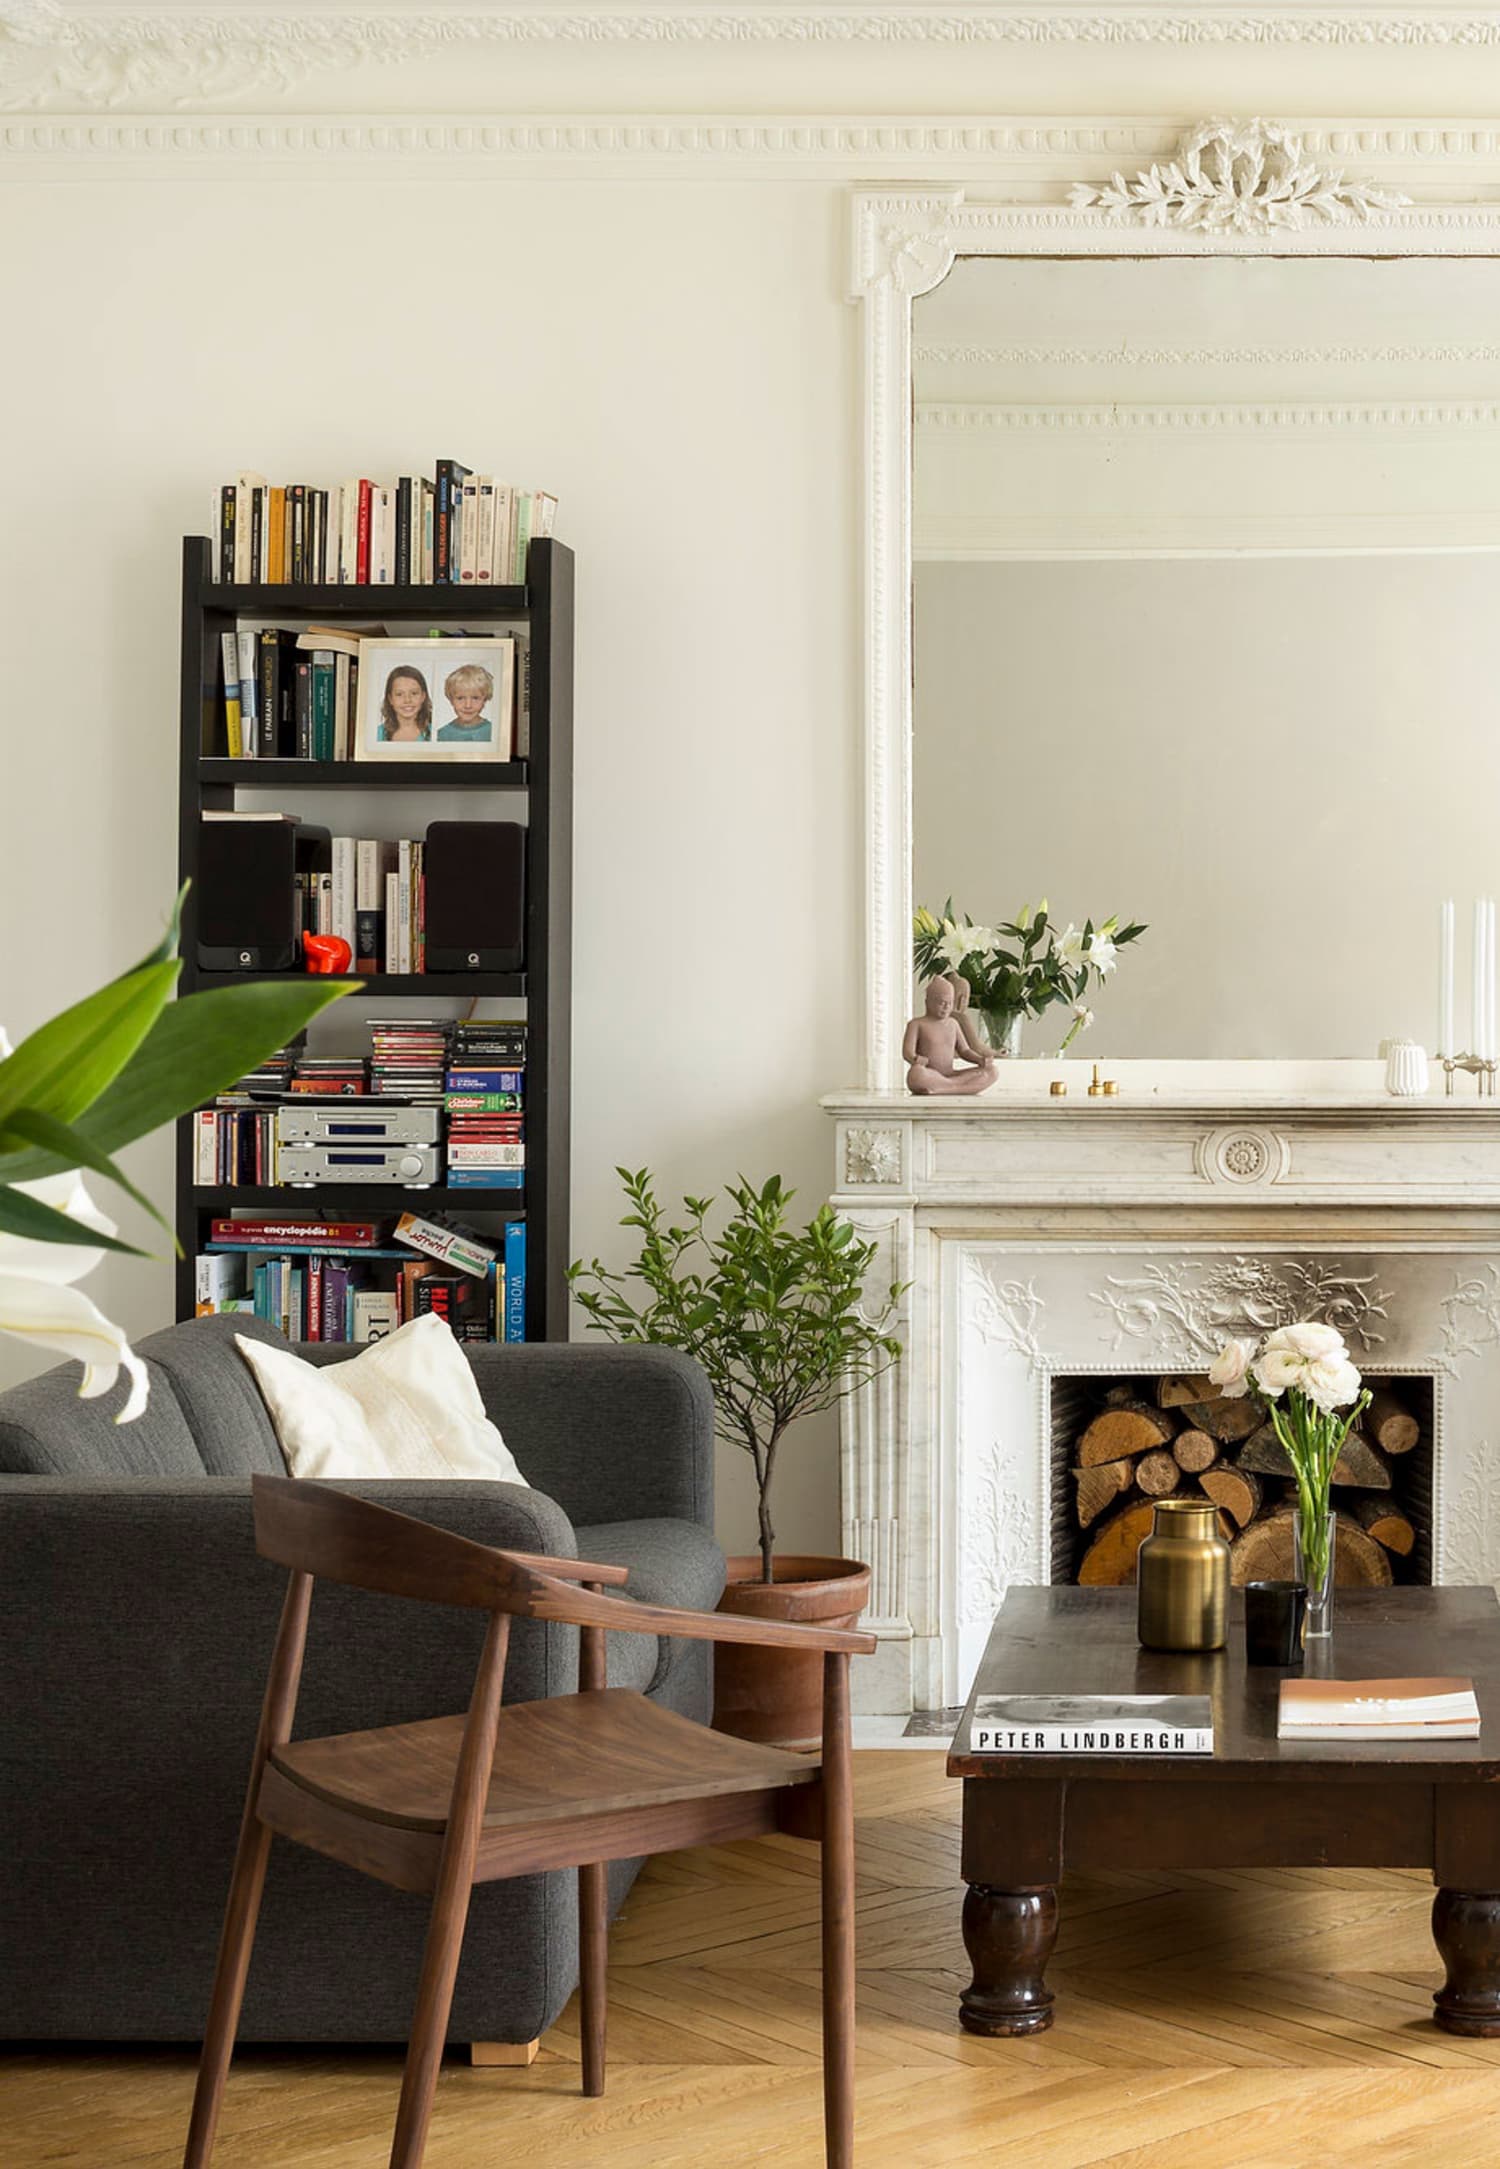 This Chic Paris Apartment Is a Perfect Mix of Old & New